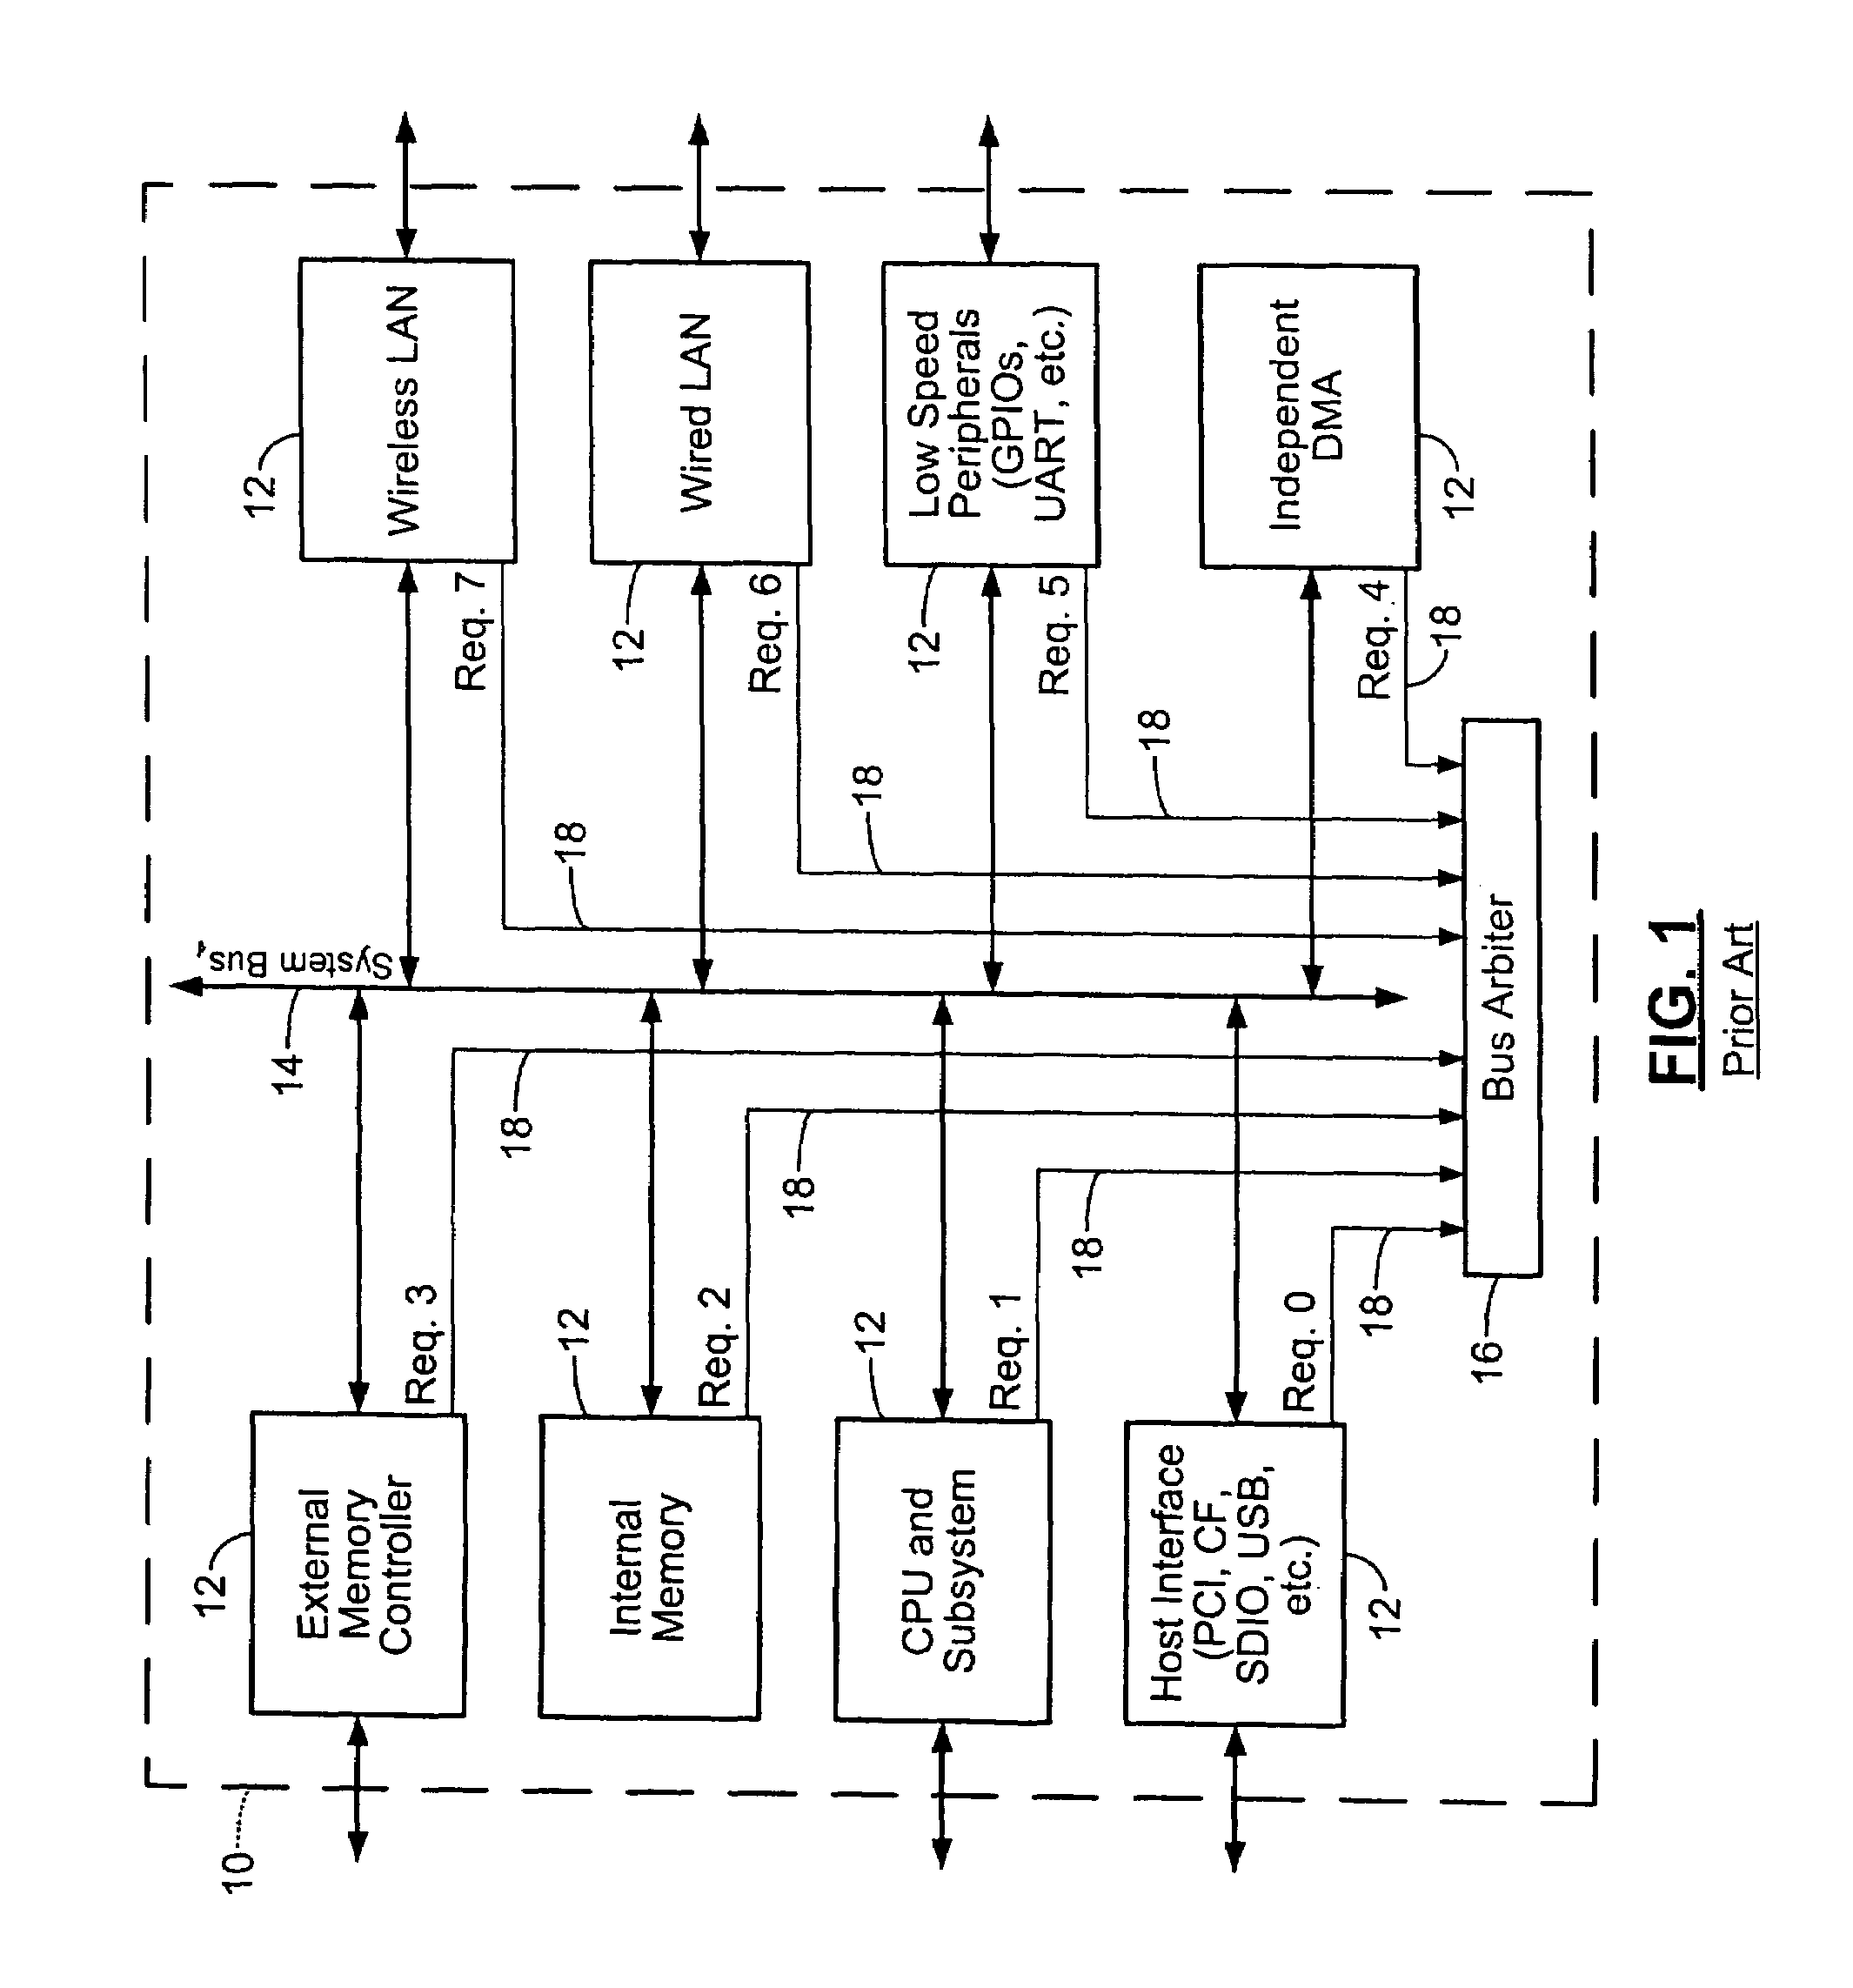 System-on-chip power reduction through dynamic clock frequency